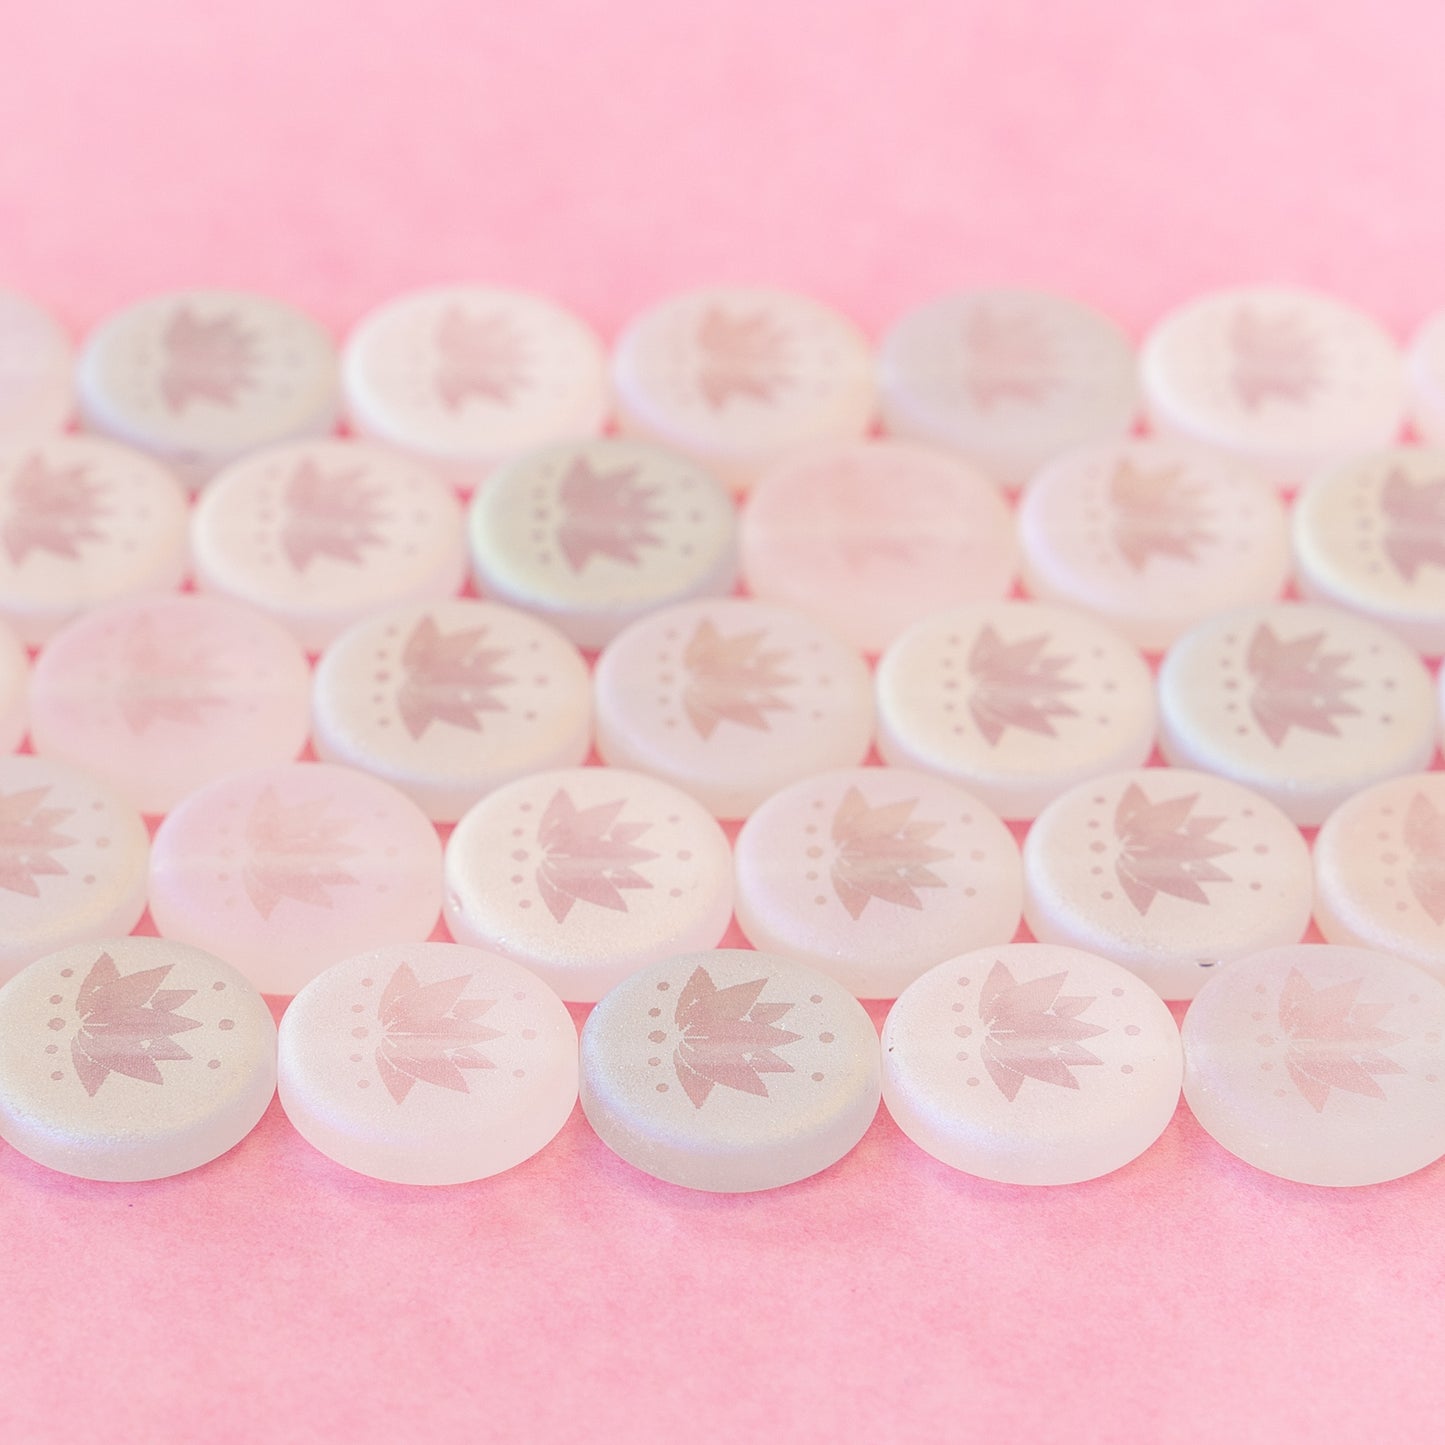 Load image into Gallery viewer, 14mm Lotus Flower Coin Beads - Crystal Matte AB - 8 beads
